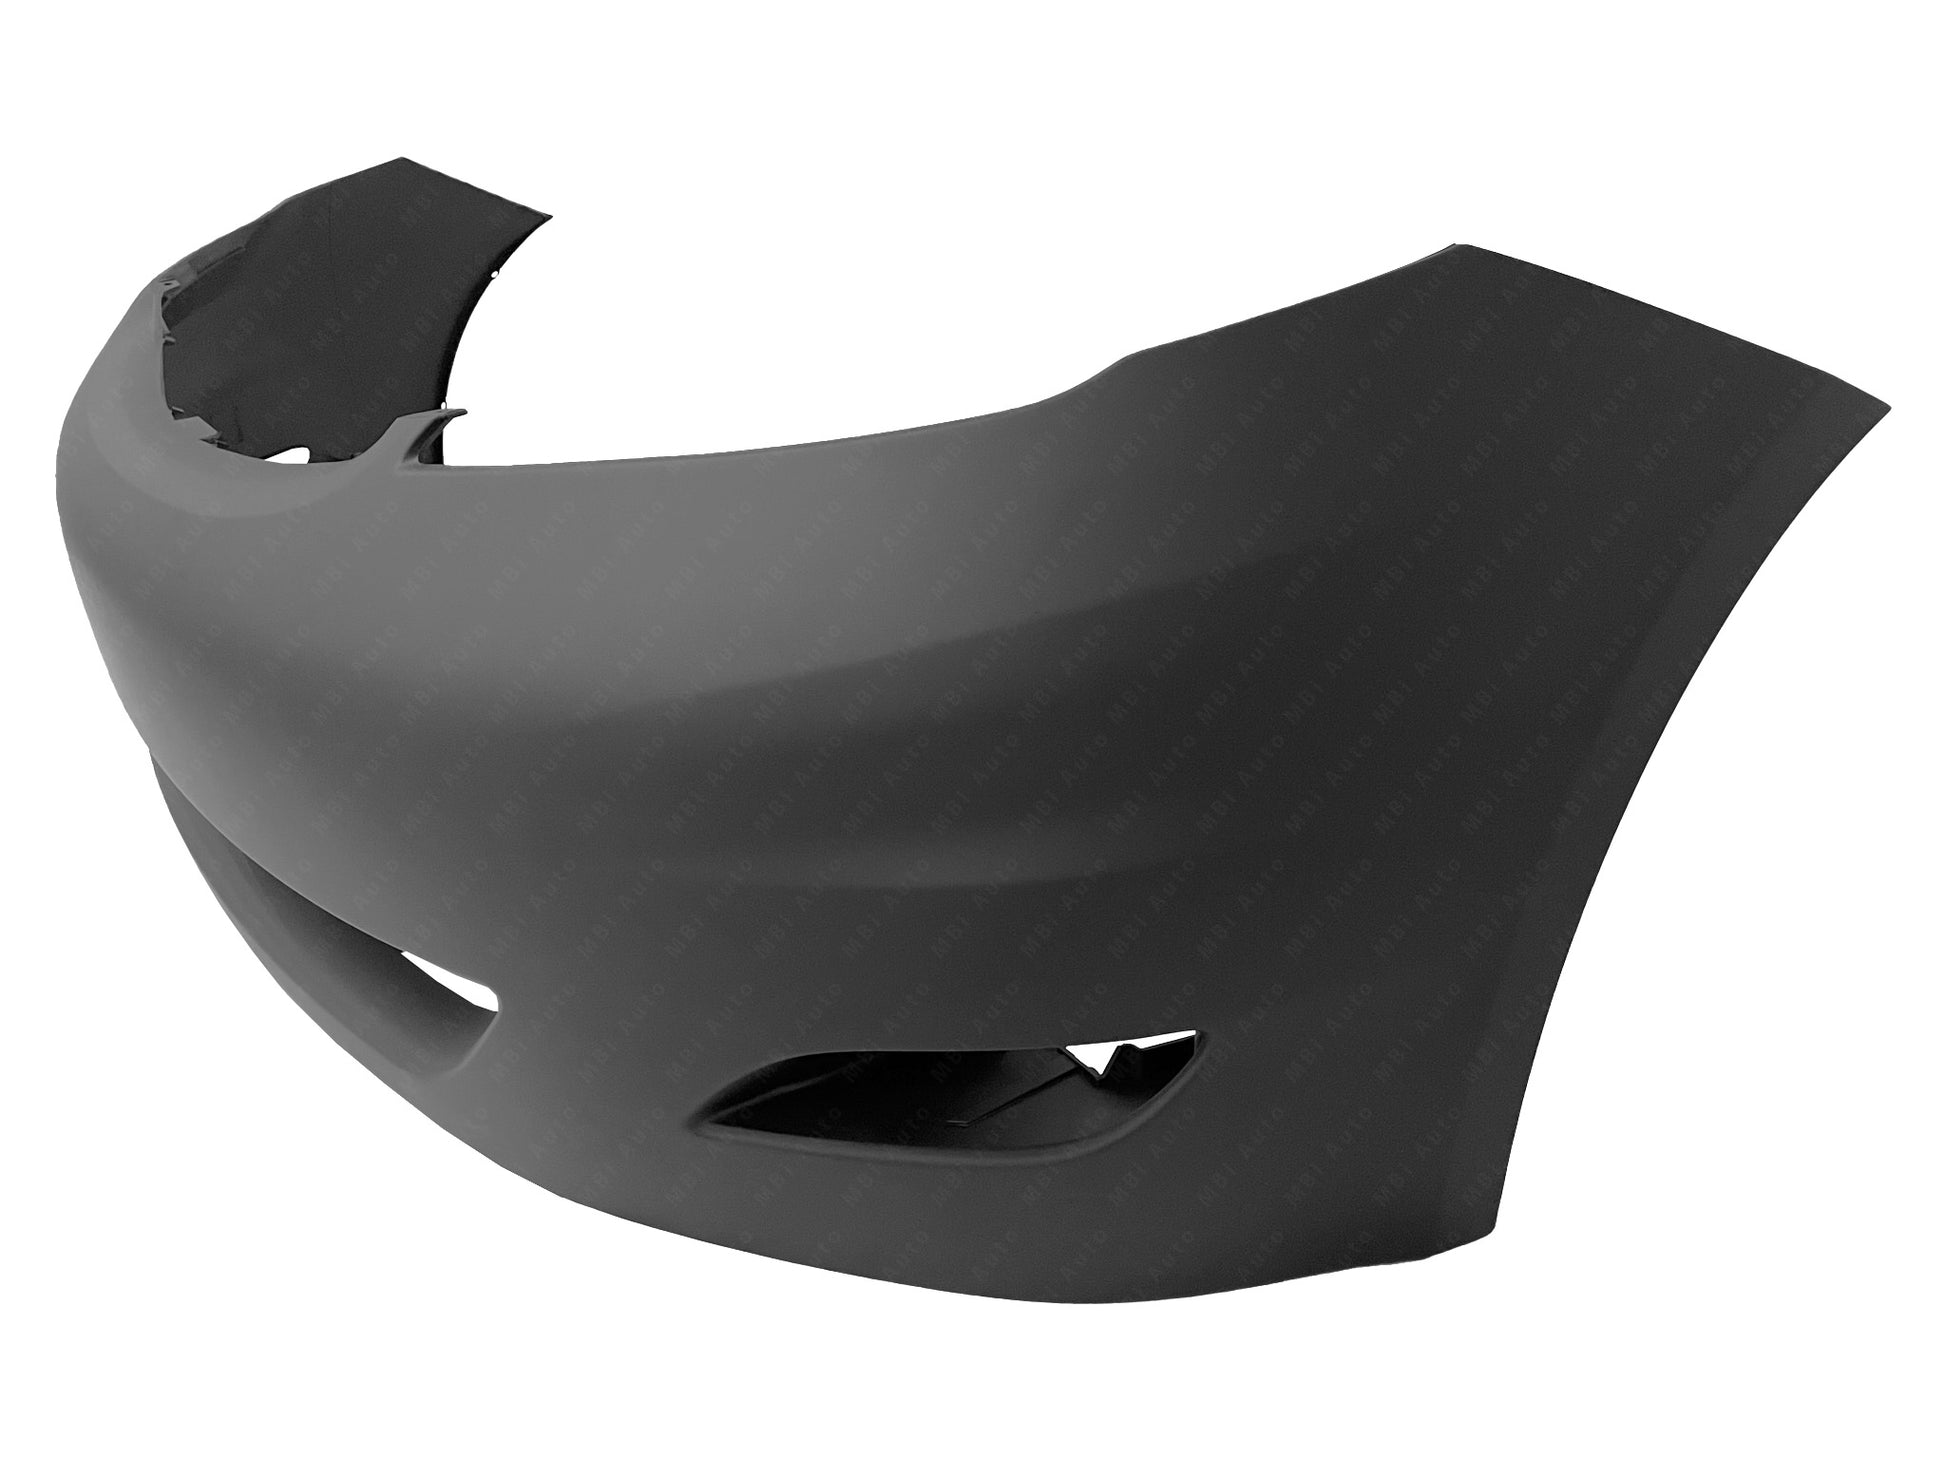 Toyota Sienna 2006 - 2010 Front Bumper Cover 06 - 10 TO1000323 Bumper King